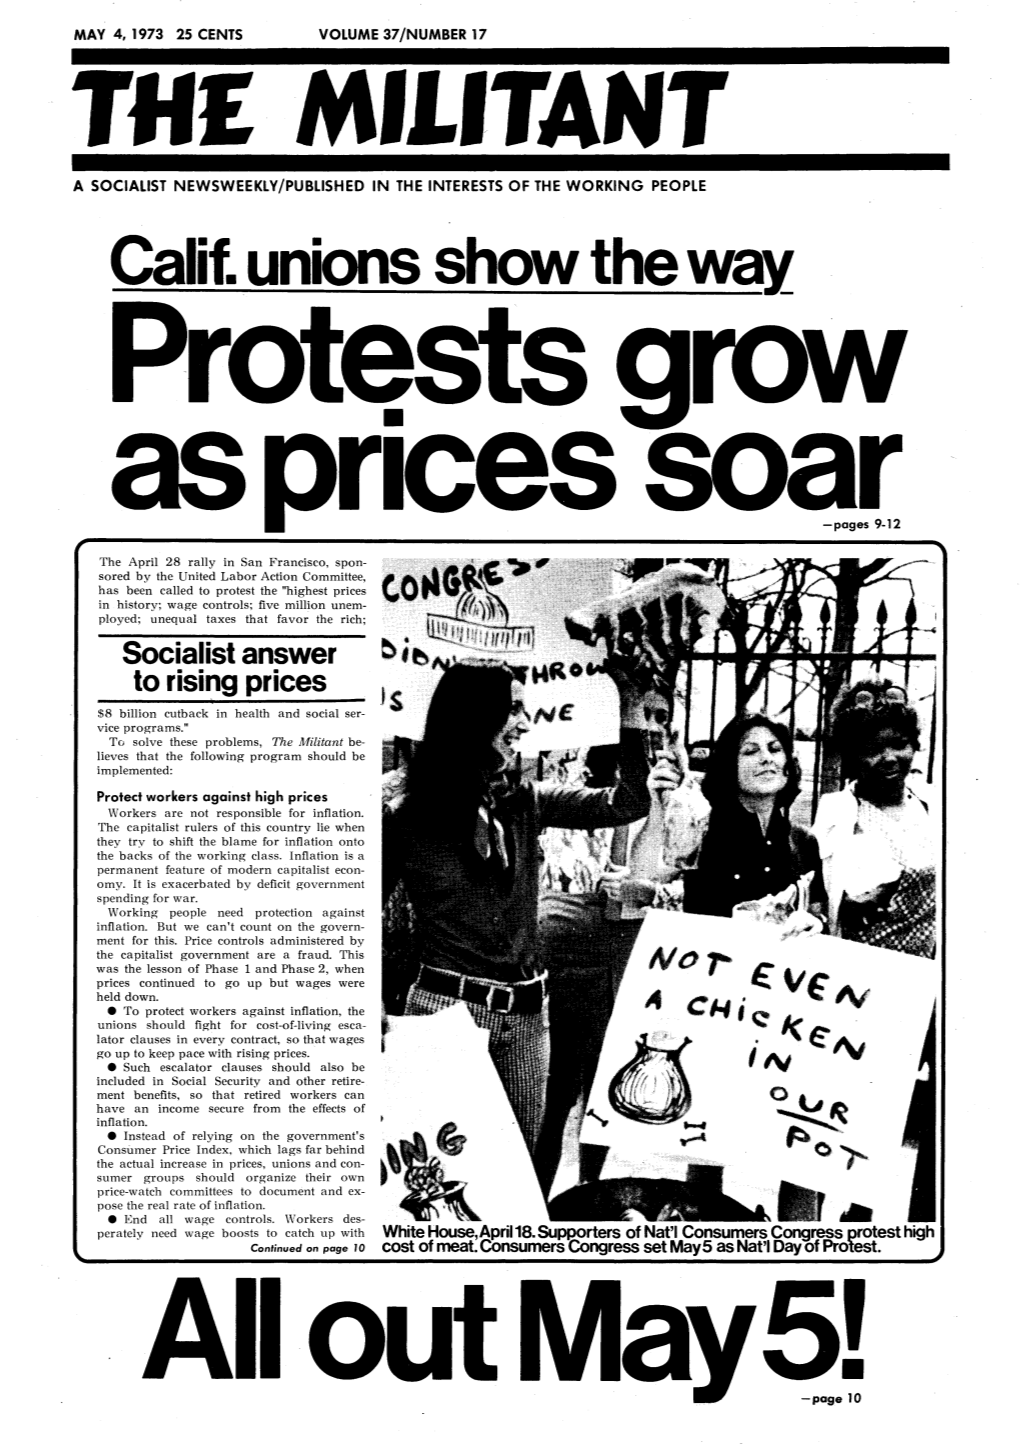 Calif. Unions Show the Way